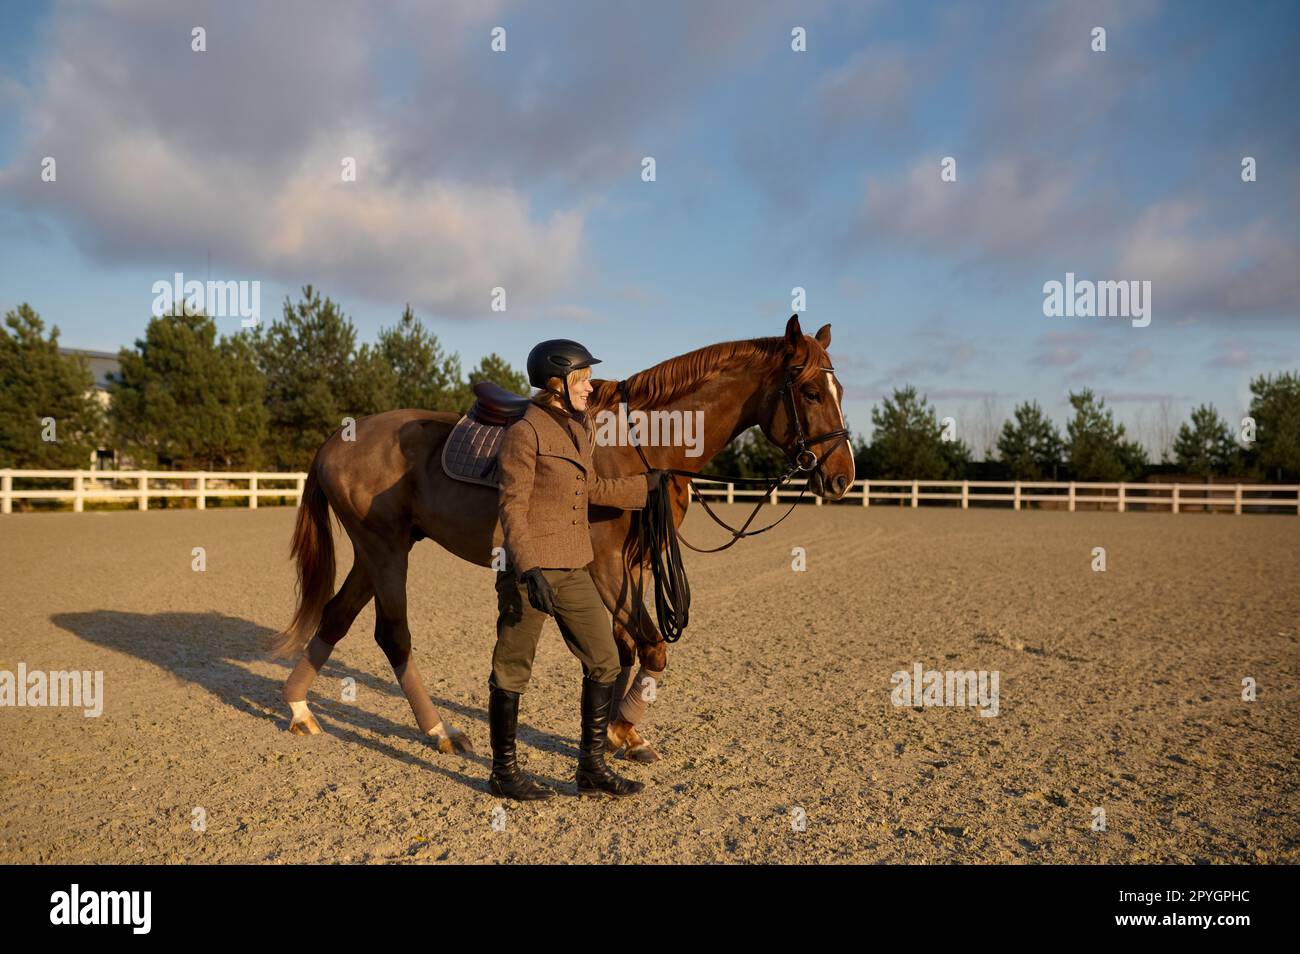 Woman rider walking horse side by side holding harness saddle-girth Stock Photo